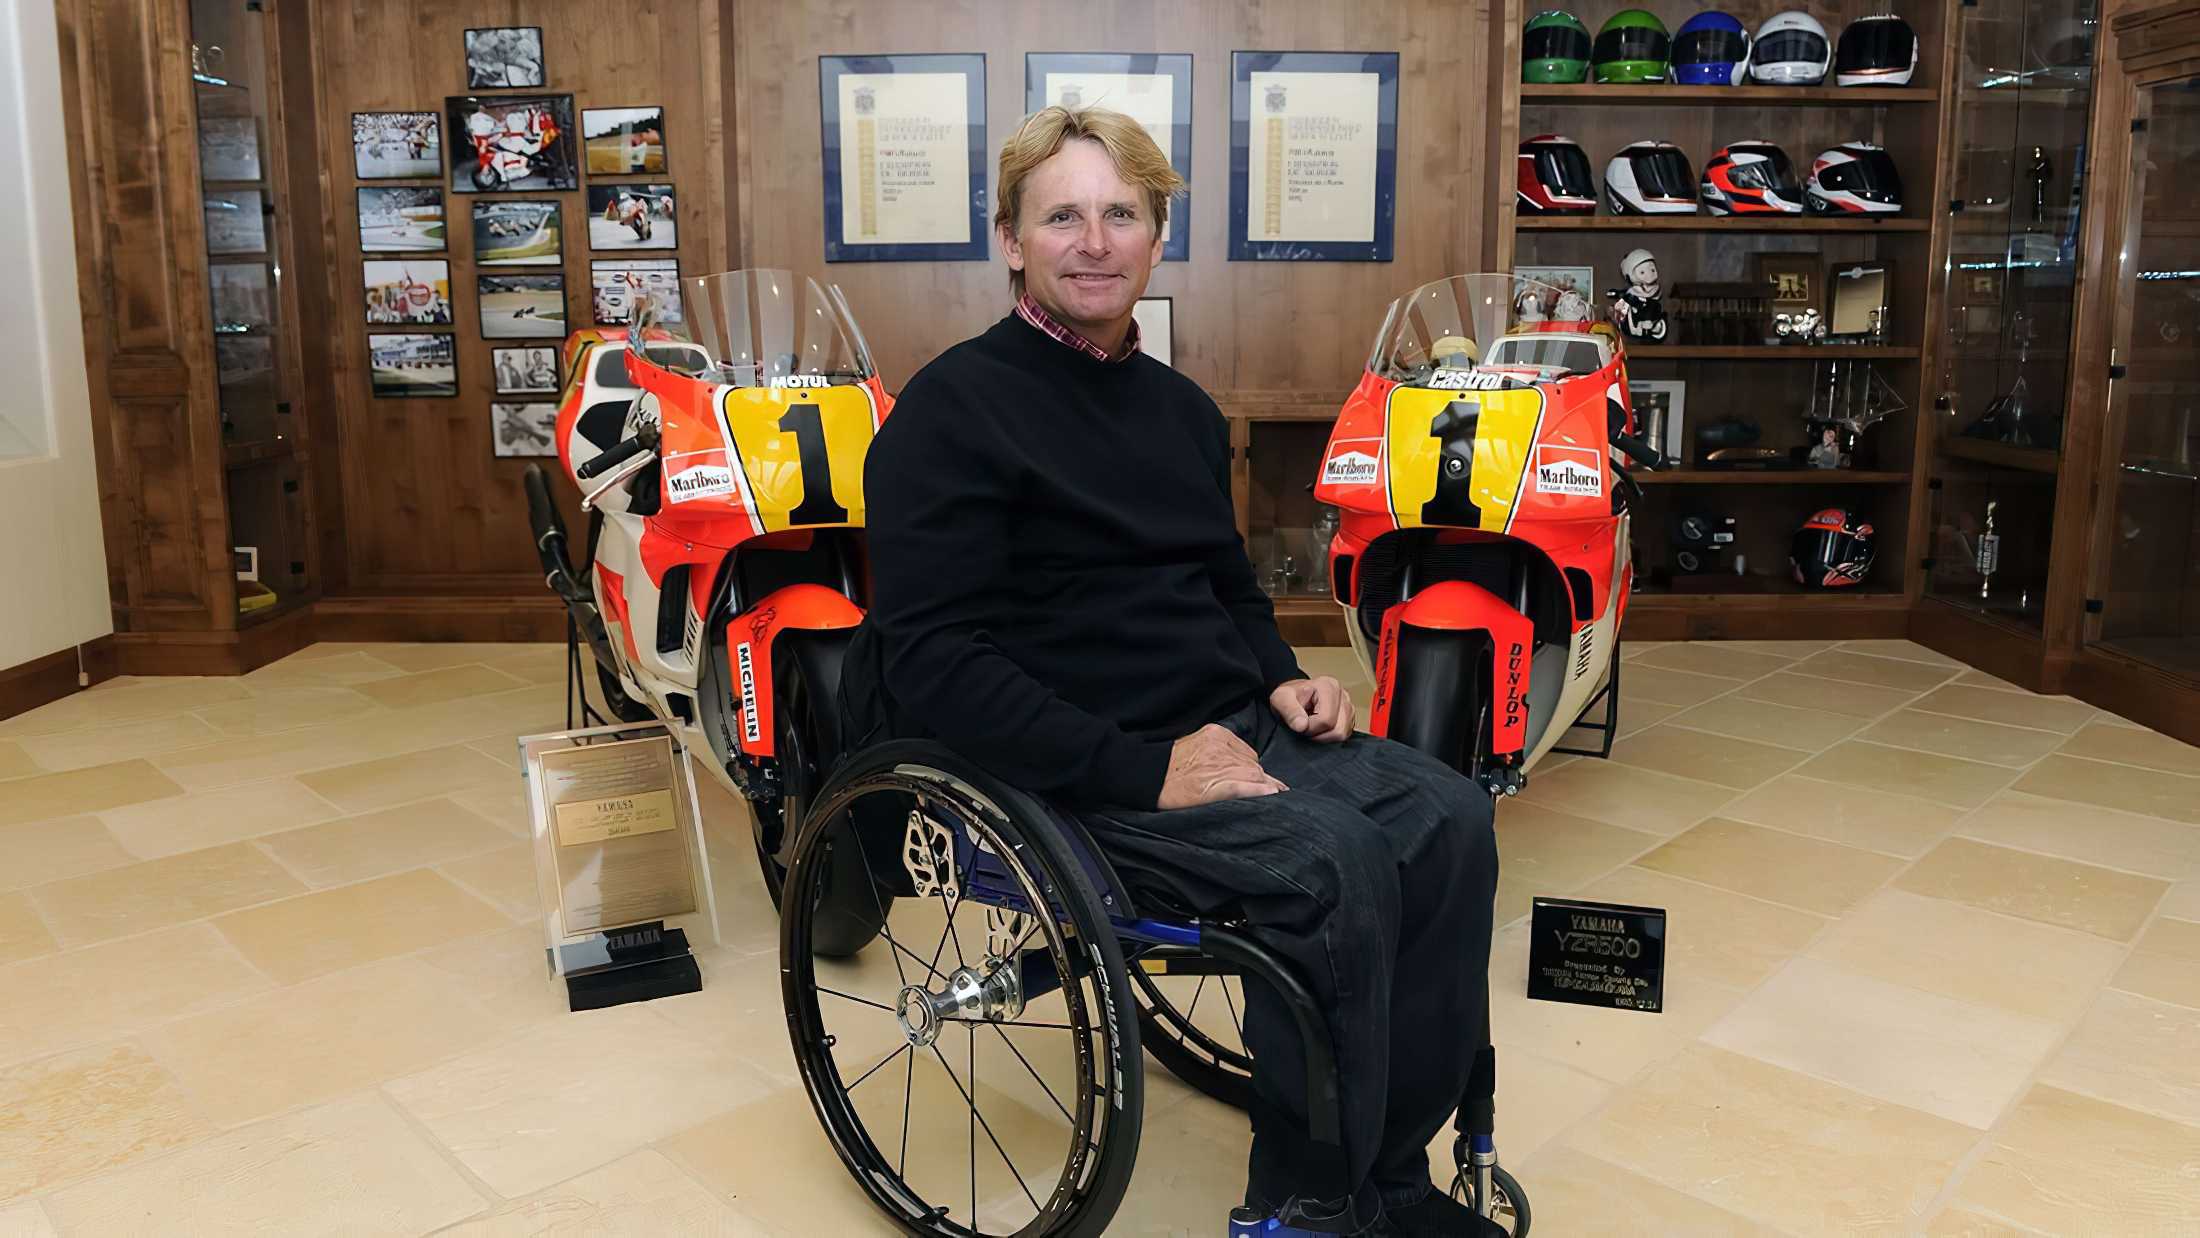 Wayne Rainey will ride at the Goodwood Festival of Speed
- also in the MOTORCYCLES.NEWS APP